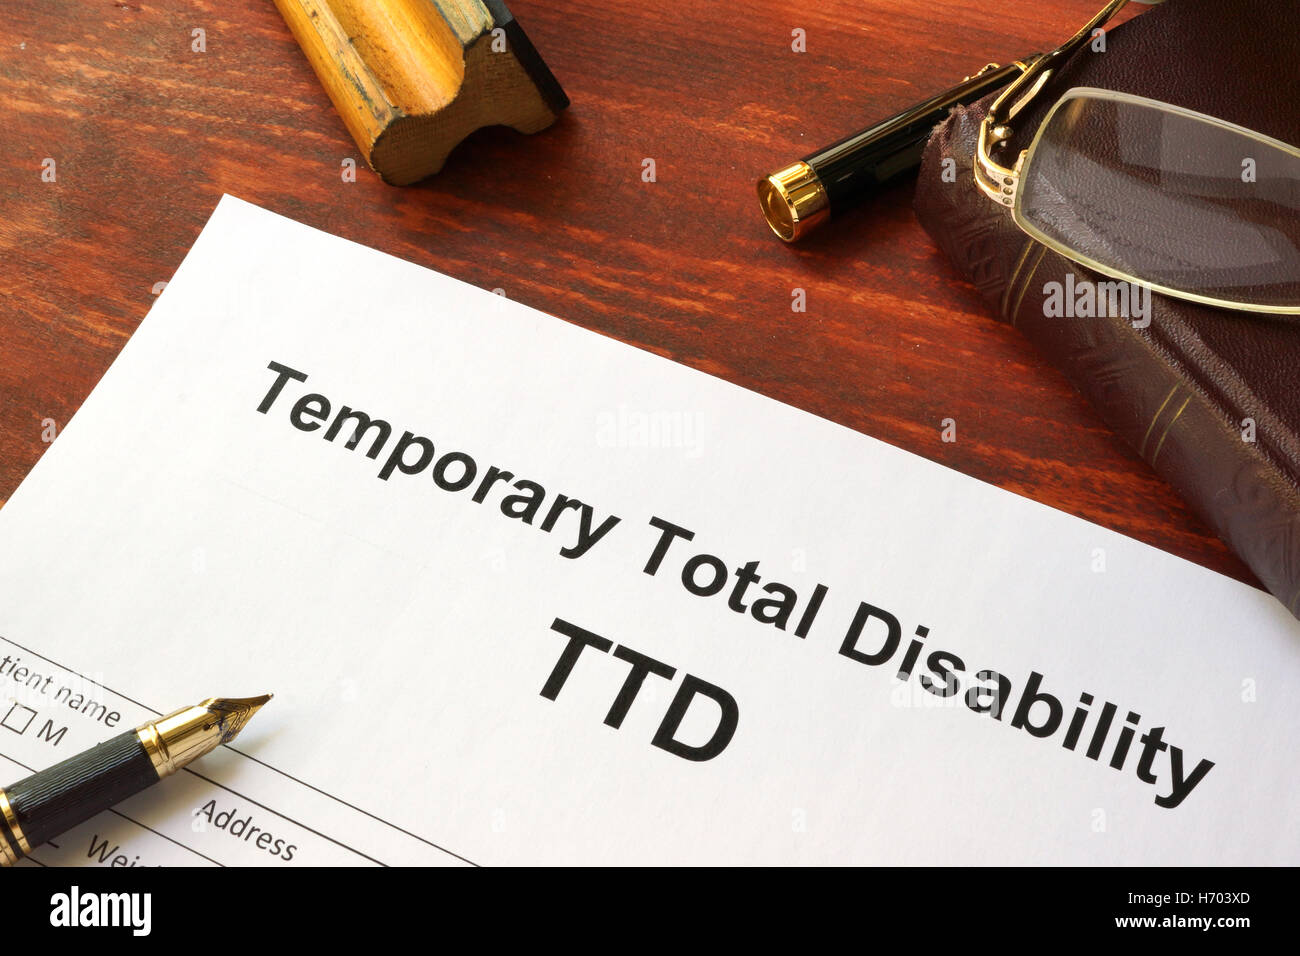 Temporary Total Disability (TTD) form on a wooden table. Stock Photo